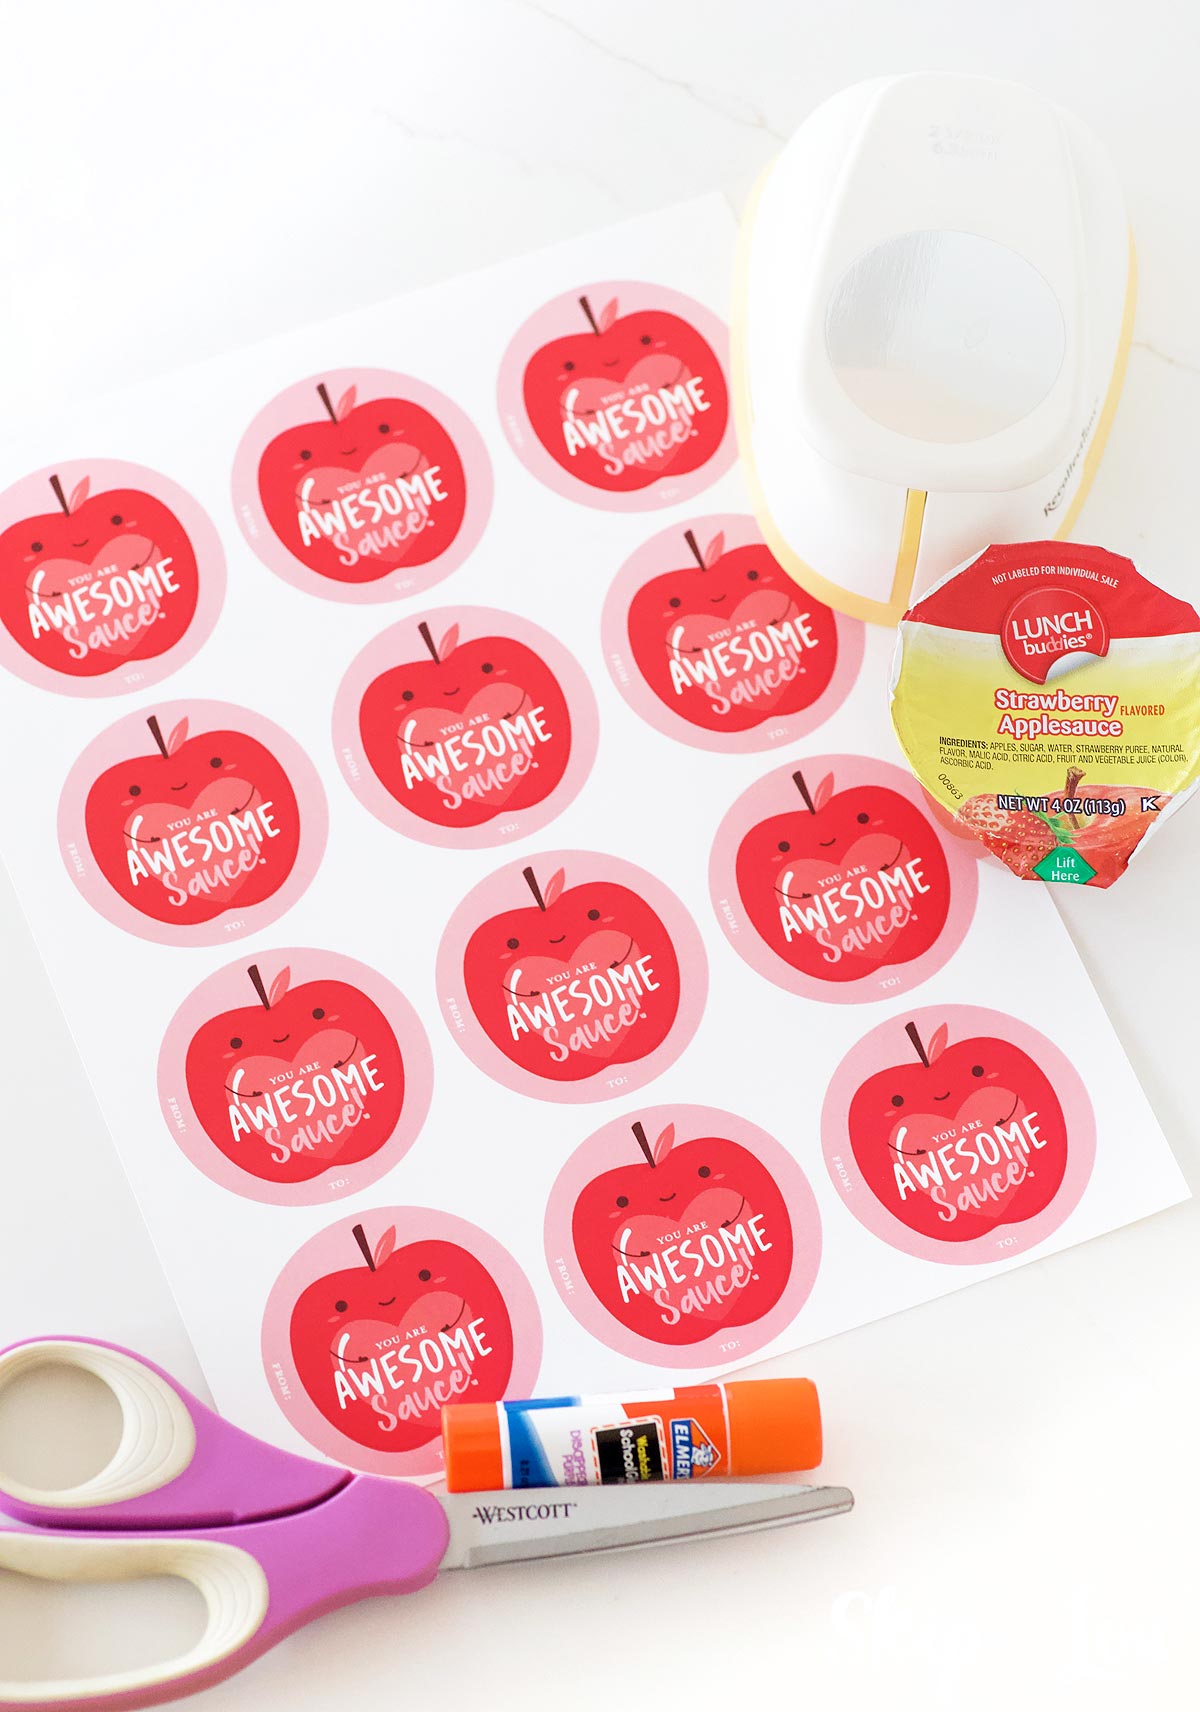 free printable, apple sauce cups, scissors, glue stick everything needed to make awesomone sauce valentines